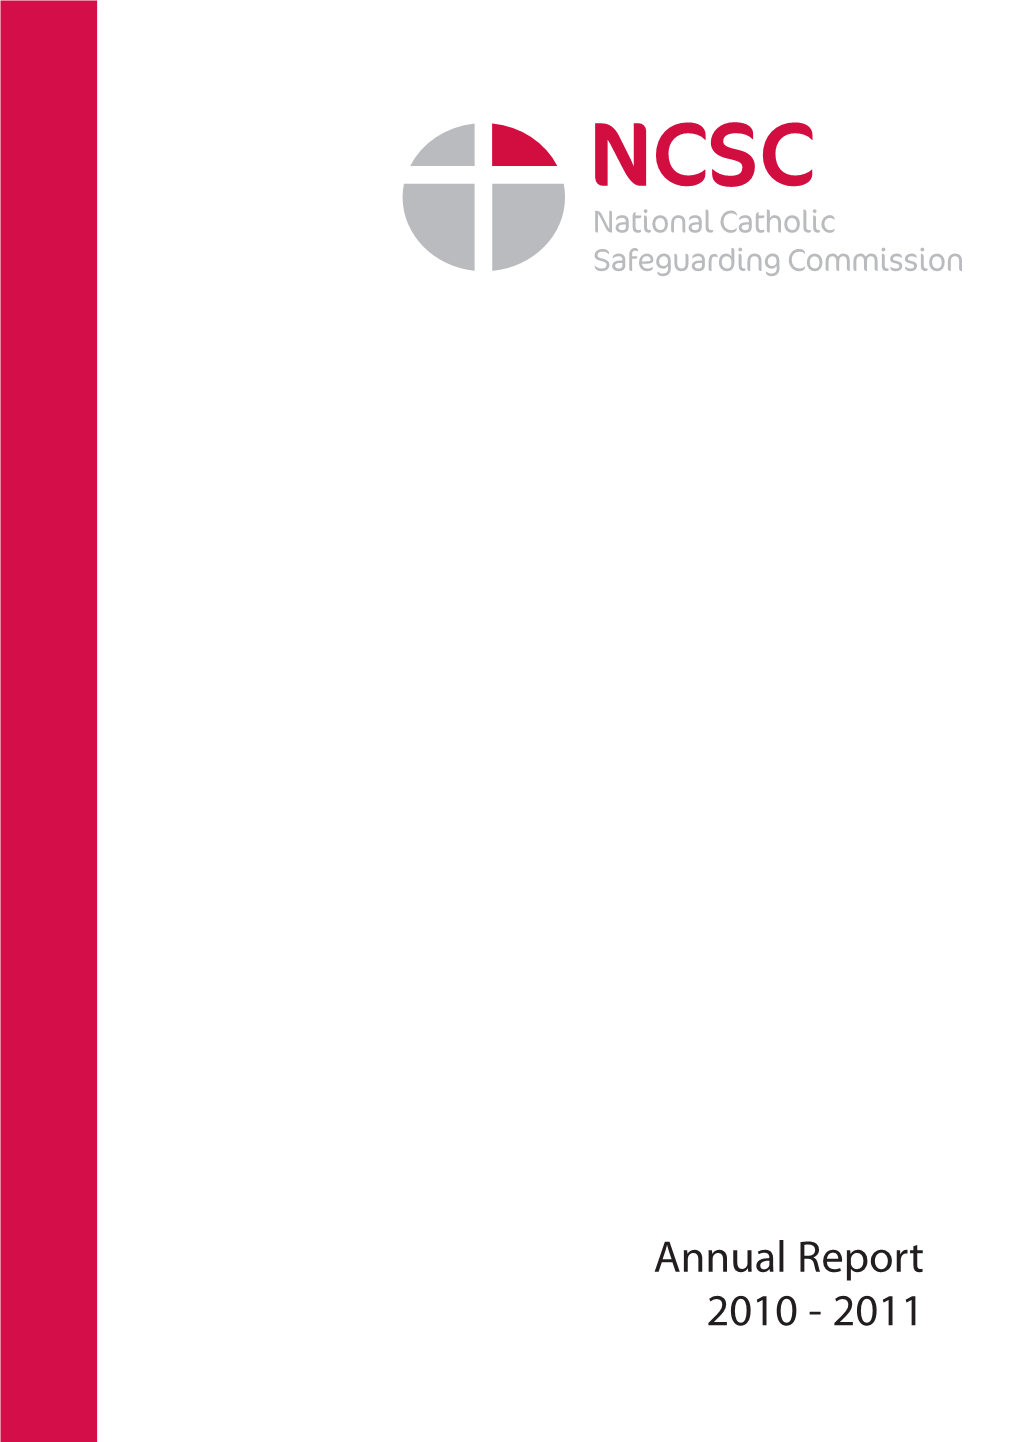 NCSC Annual Report 2010-11